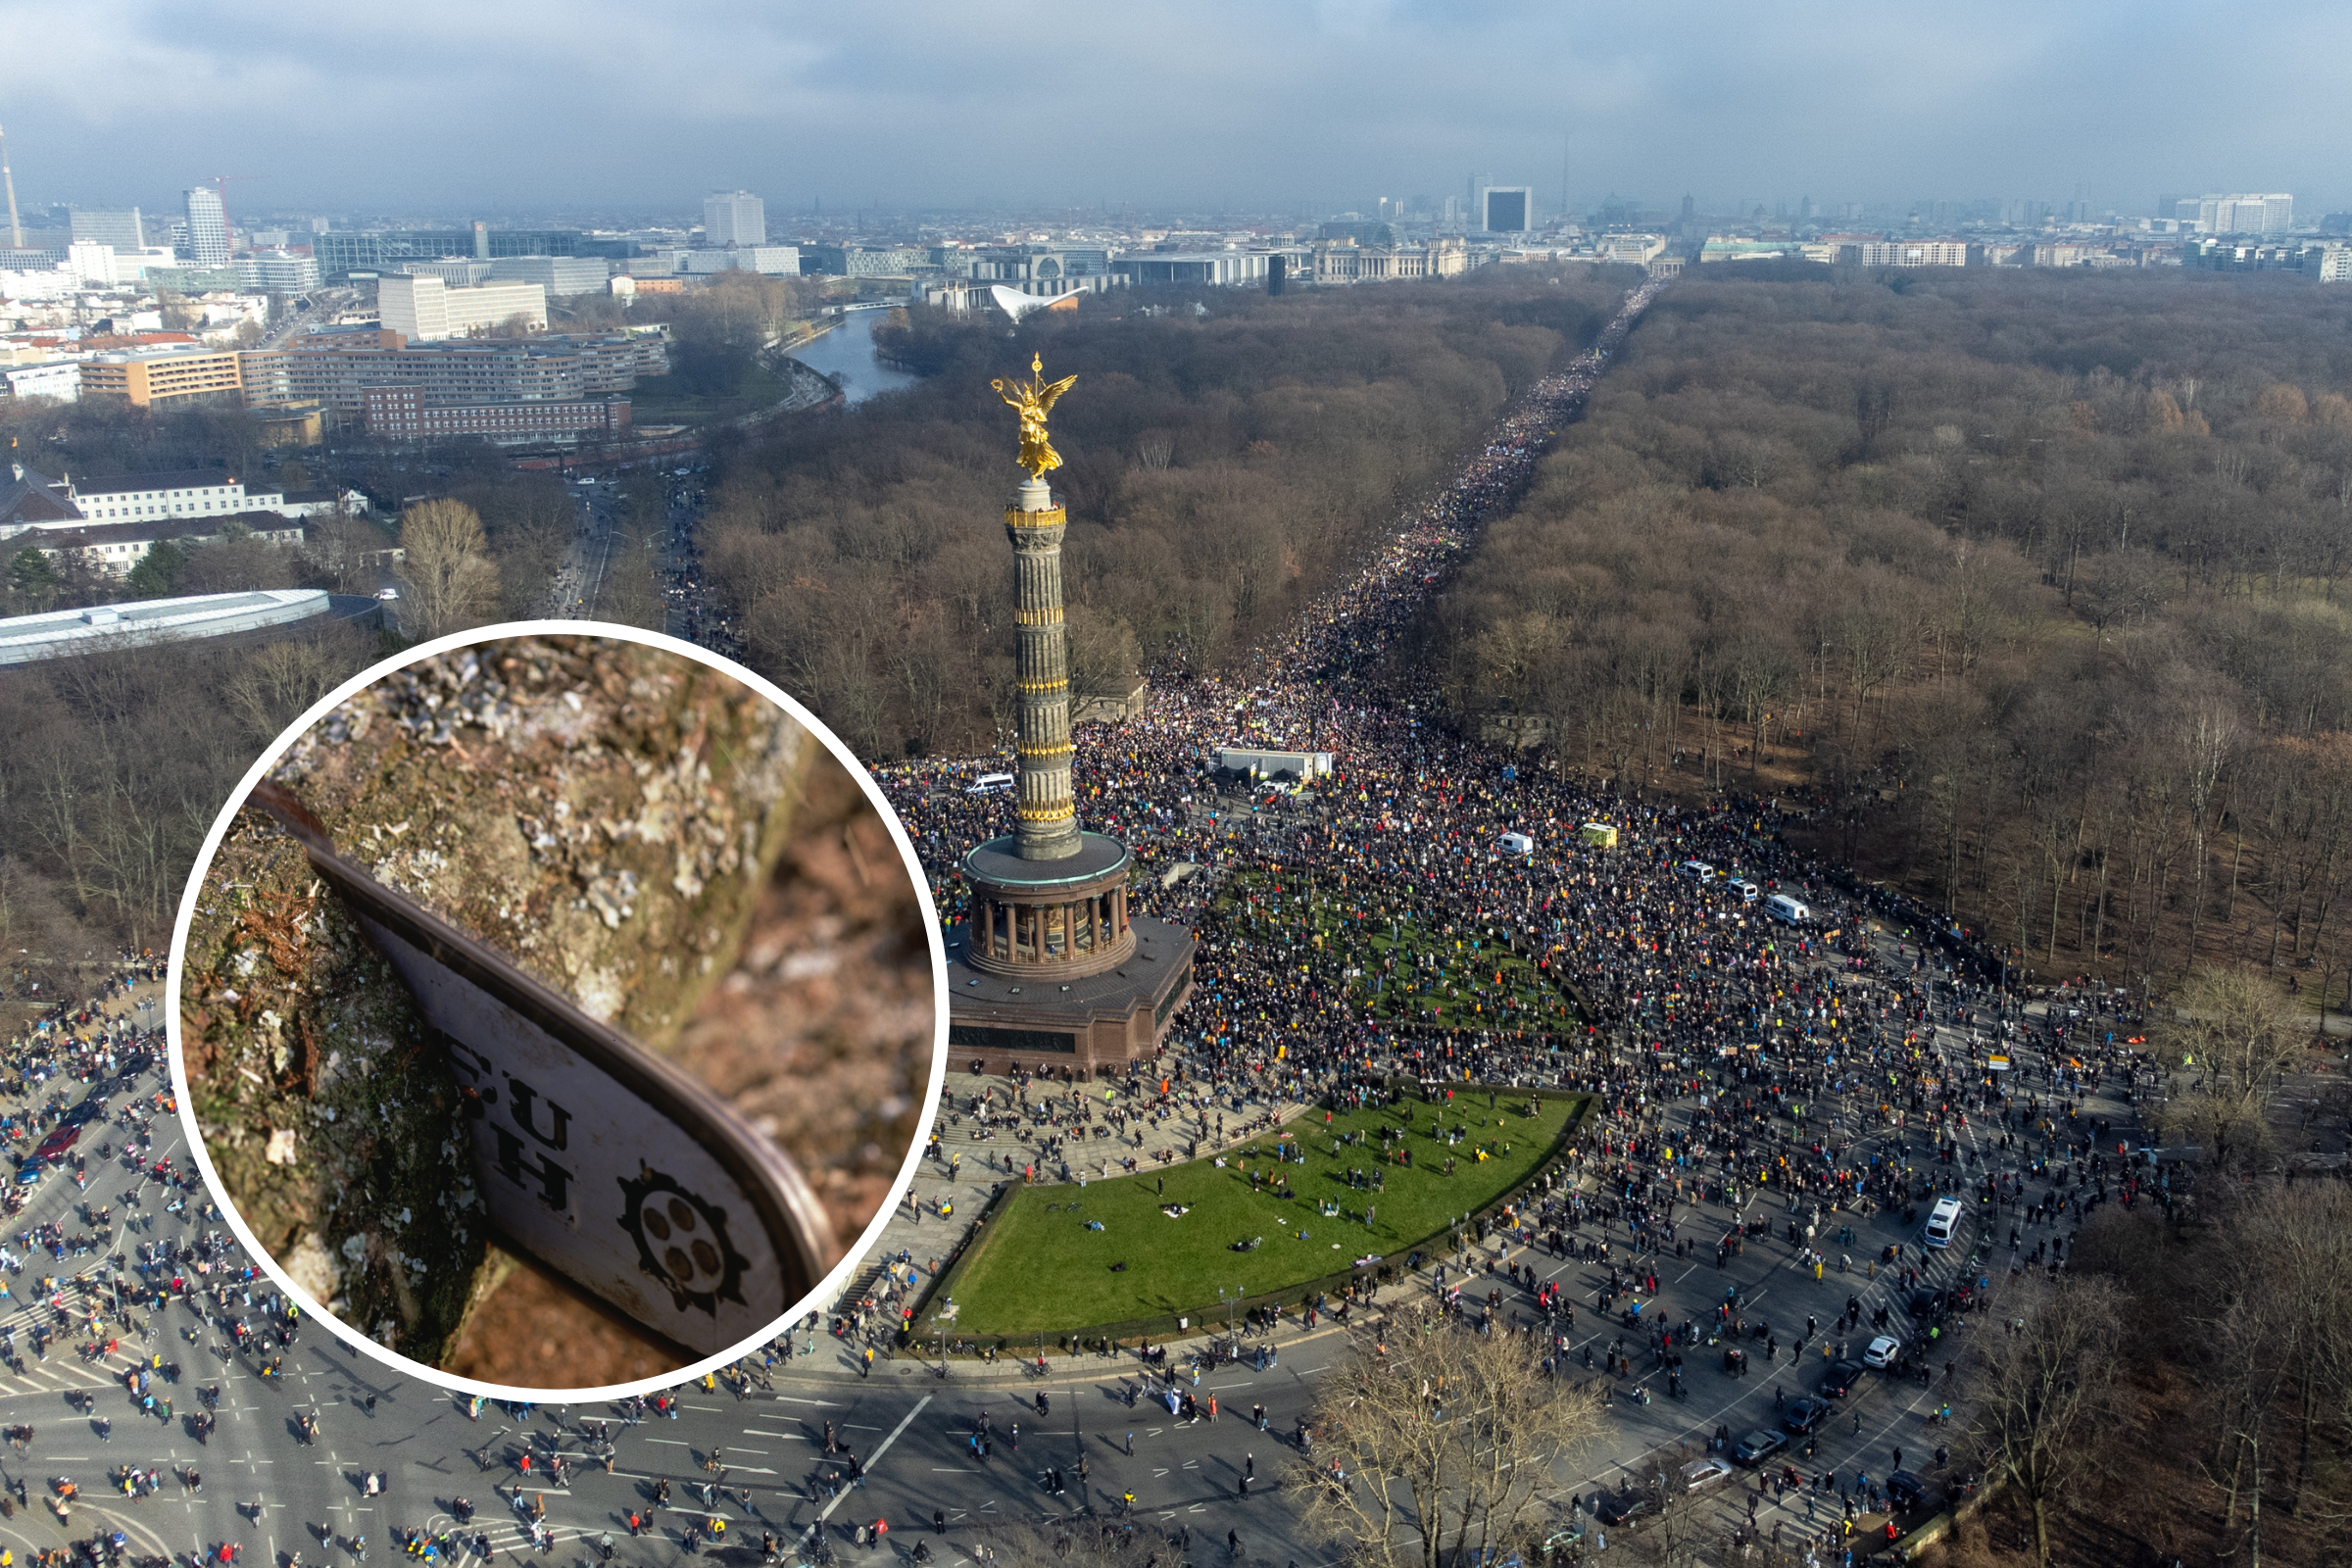 Fact Check: Did Fuel Crisis Force Berliners to Chop Trees in Tiergarten?